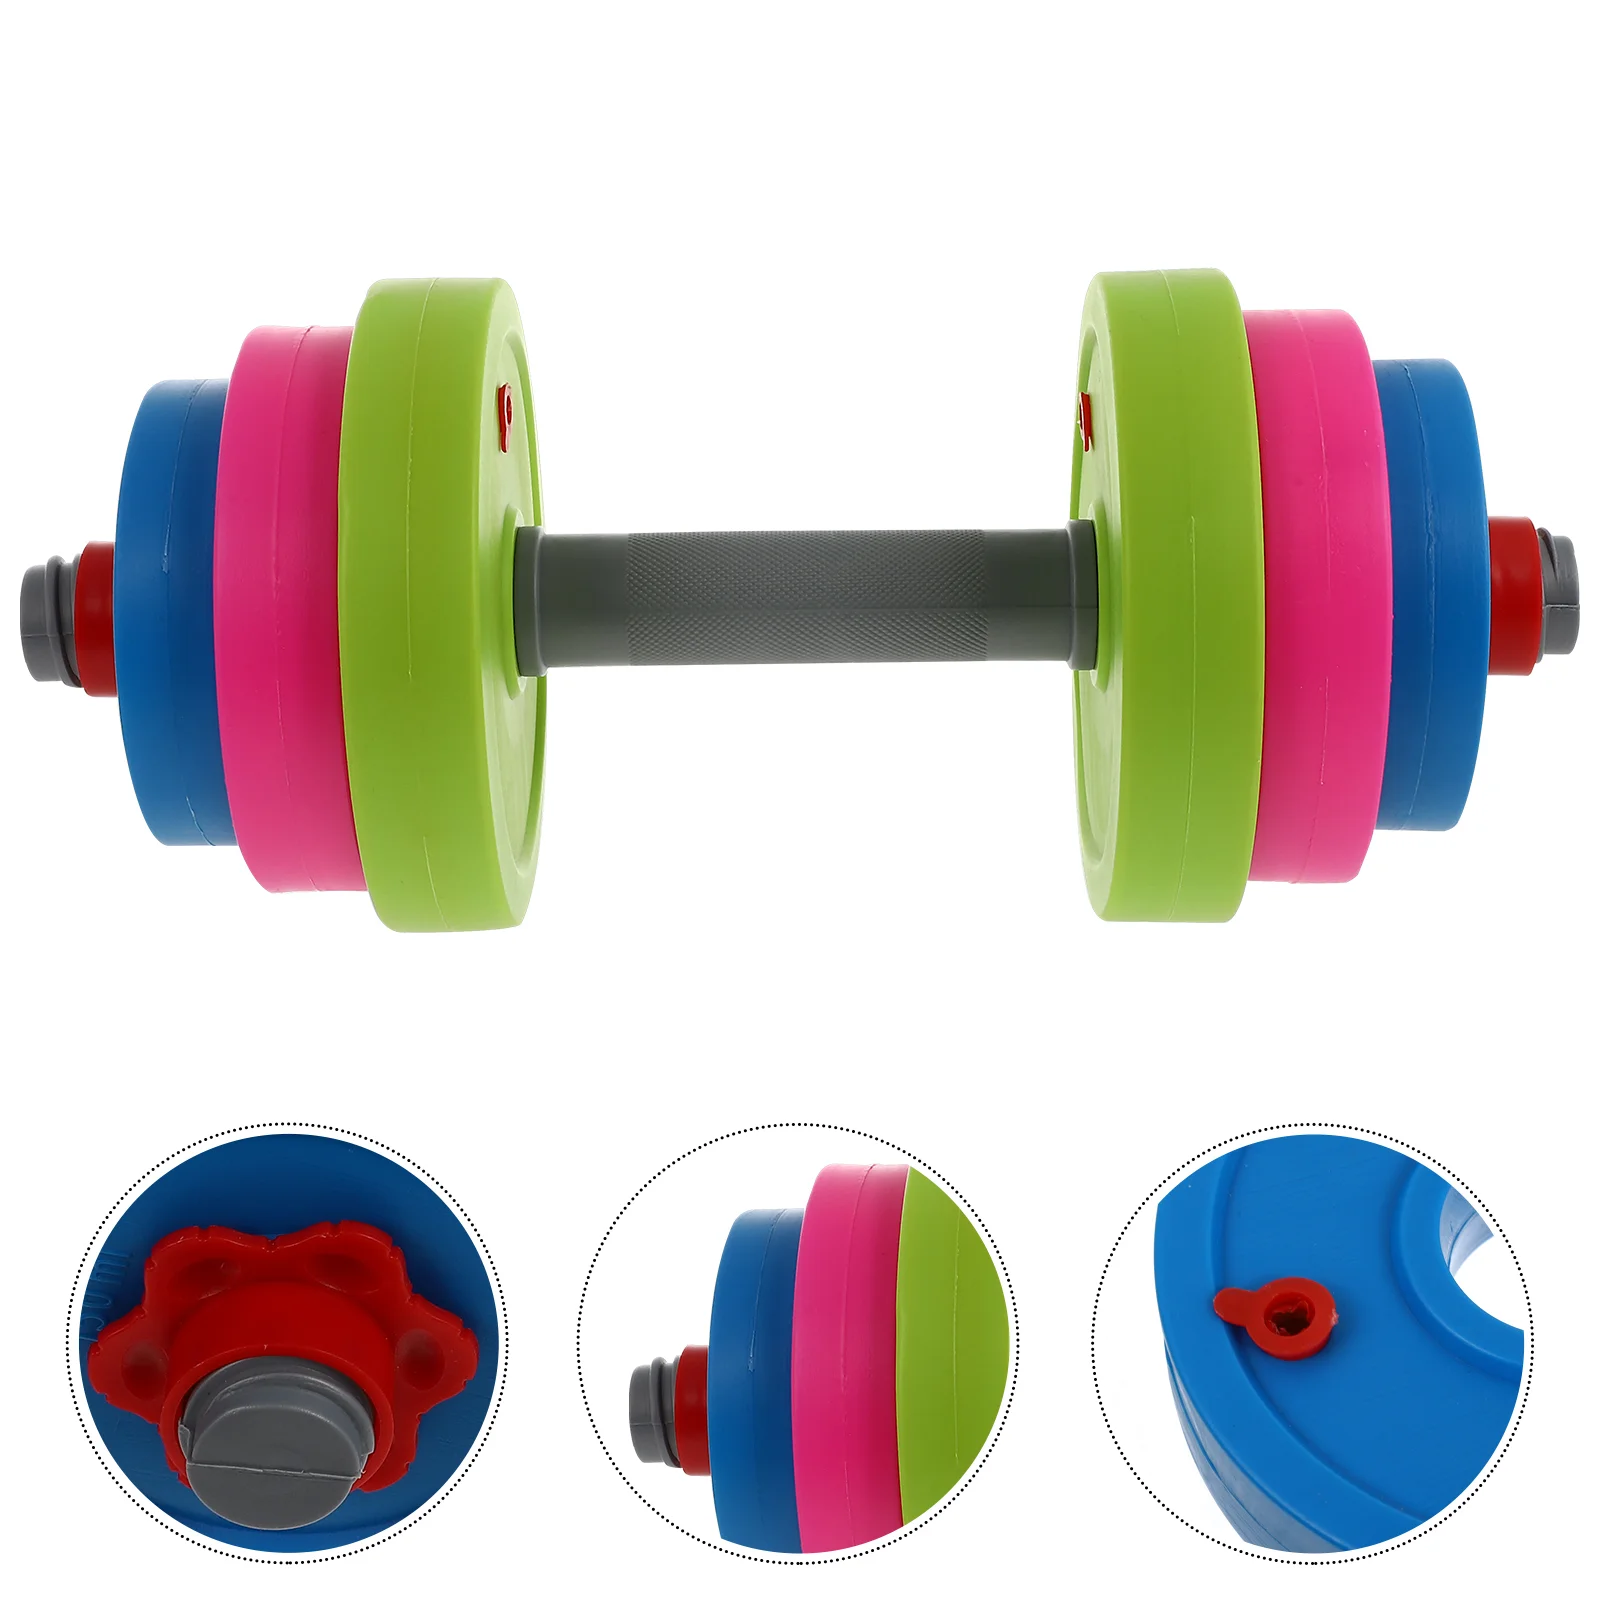 

Weightlifting Barbell Toys Kids Sports Doorway Gym Set Children Exercise Dumbbell Pretend Workout Dog Toddler Weights